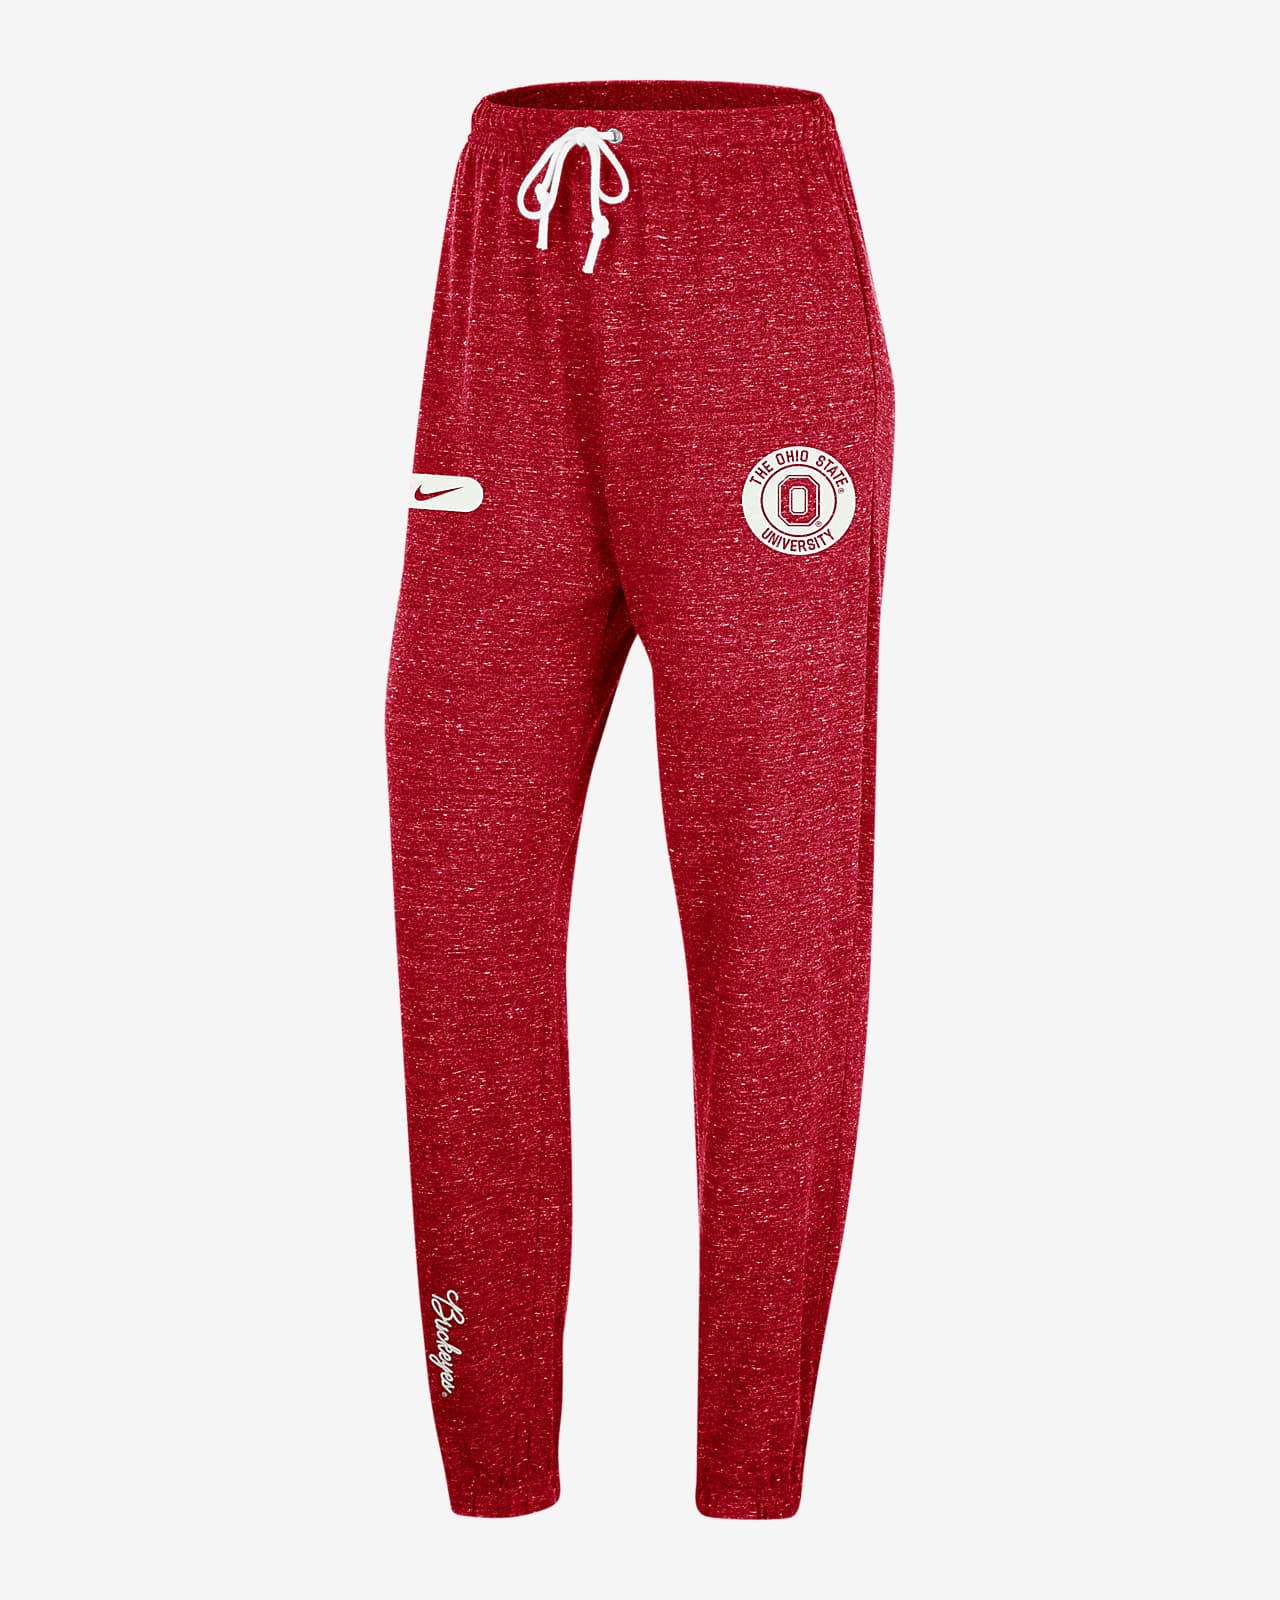 Ohio State Gym Vintage Women's Nike College Joggers.